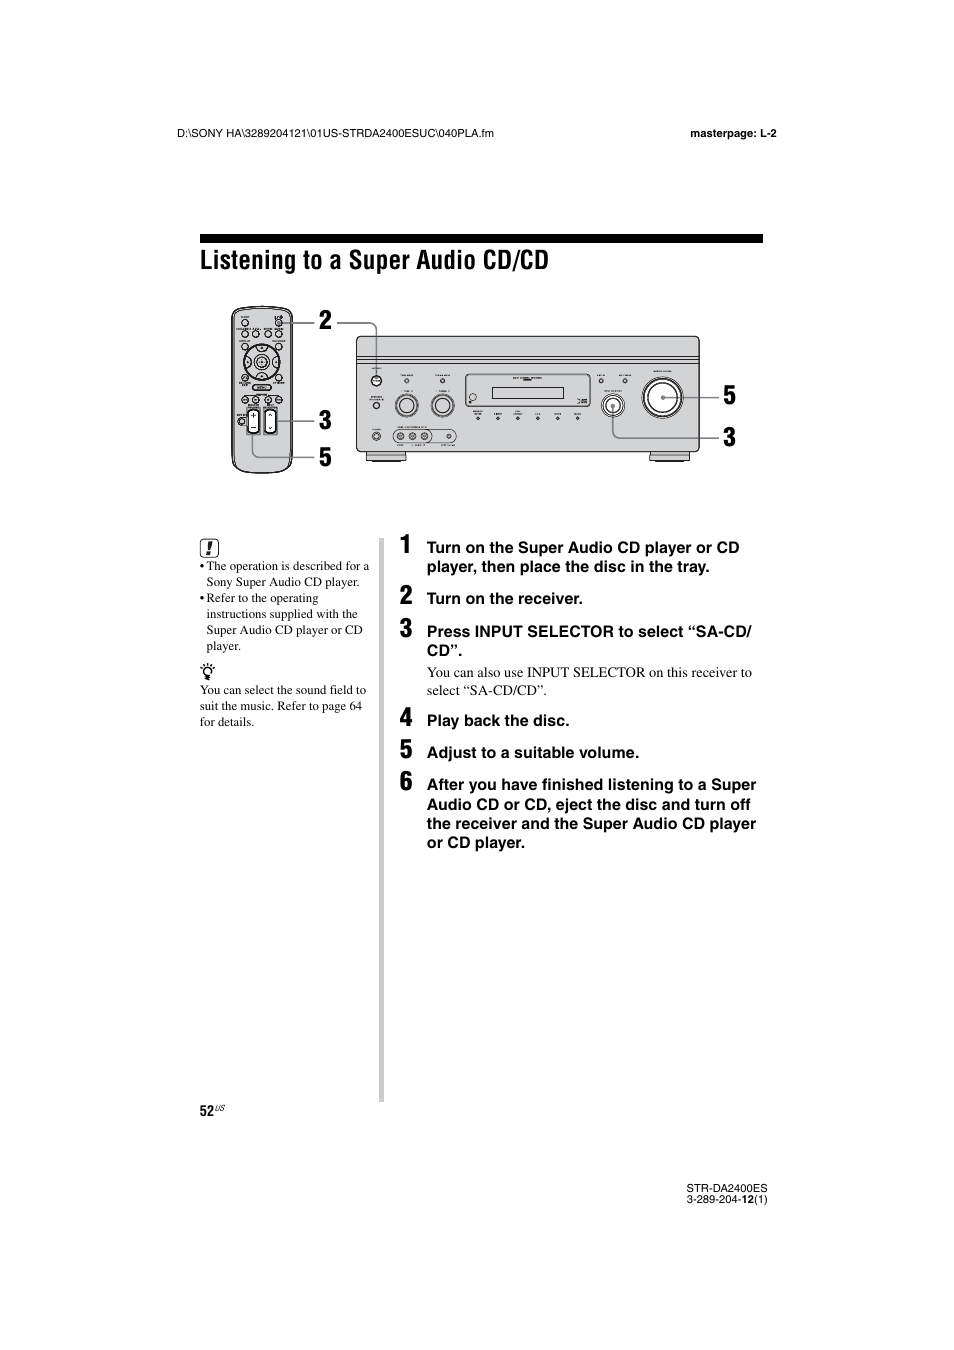 Listening to a super audio cd/cd | Sony 3-289-204-12(1) User Manual | Page 52 / 140